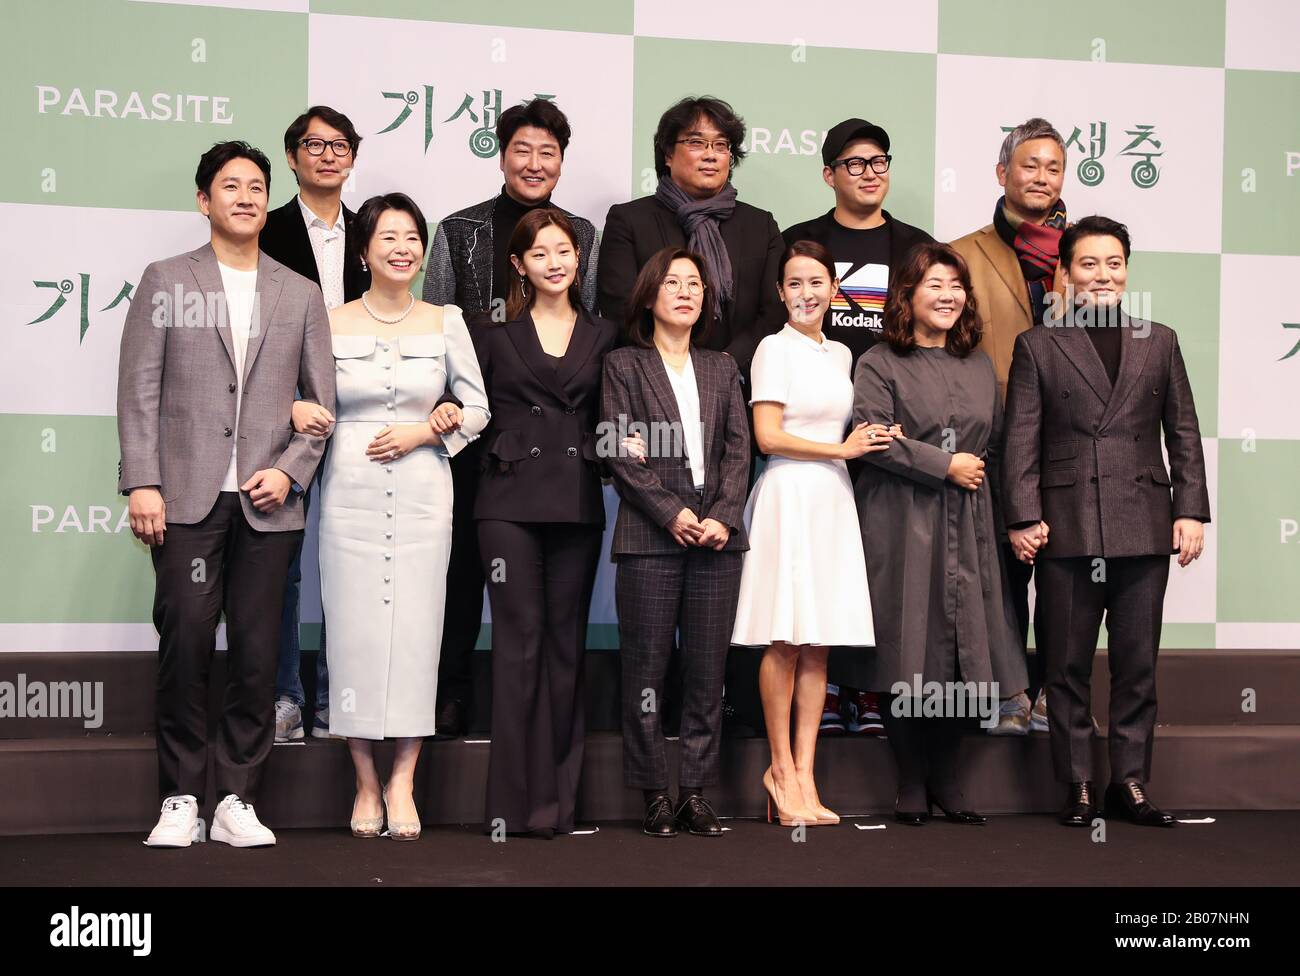 (200219) -- SEOUL, Feb. 19, 2020 (Xinhua) -- The cast and creative team of South Korean film 'Parasite' pose for a group photo at a press conference in Seoul, South Korea, Feb. 19, 2020. 'Parasite', a South Korean black comedy, became the first non-English language film to win the Oscar for best picture, and also nabbed awards for best original screenplay, best international feature film and best director for Bong Joon-ho at the 92nd Academy Awards on Feb. 9, 2020. (Xinhua/Wang Jingqiang) Stock Photo